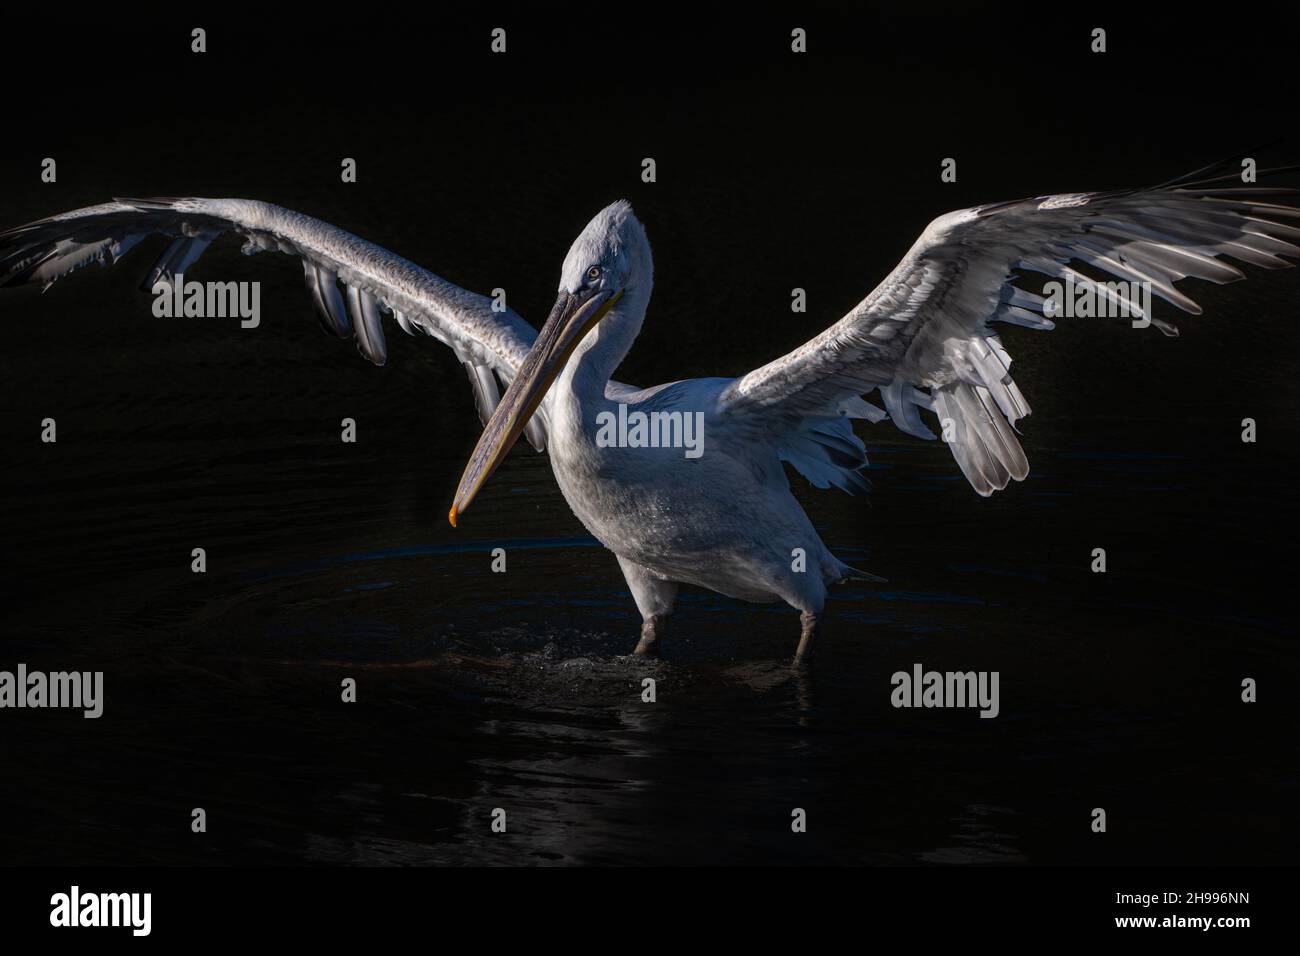 Fine art image of a Dalmatian pelican with wings spread out on a dark background Stock Photo